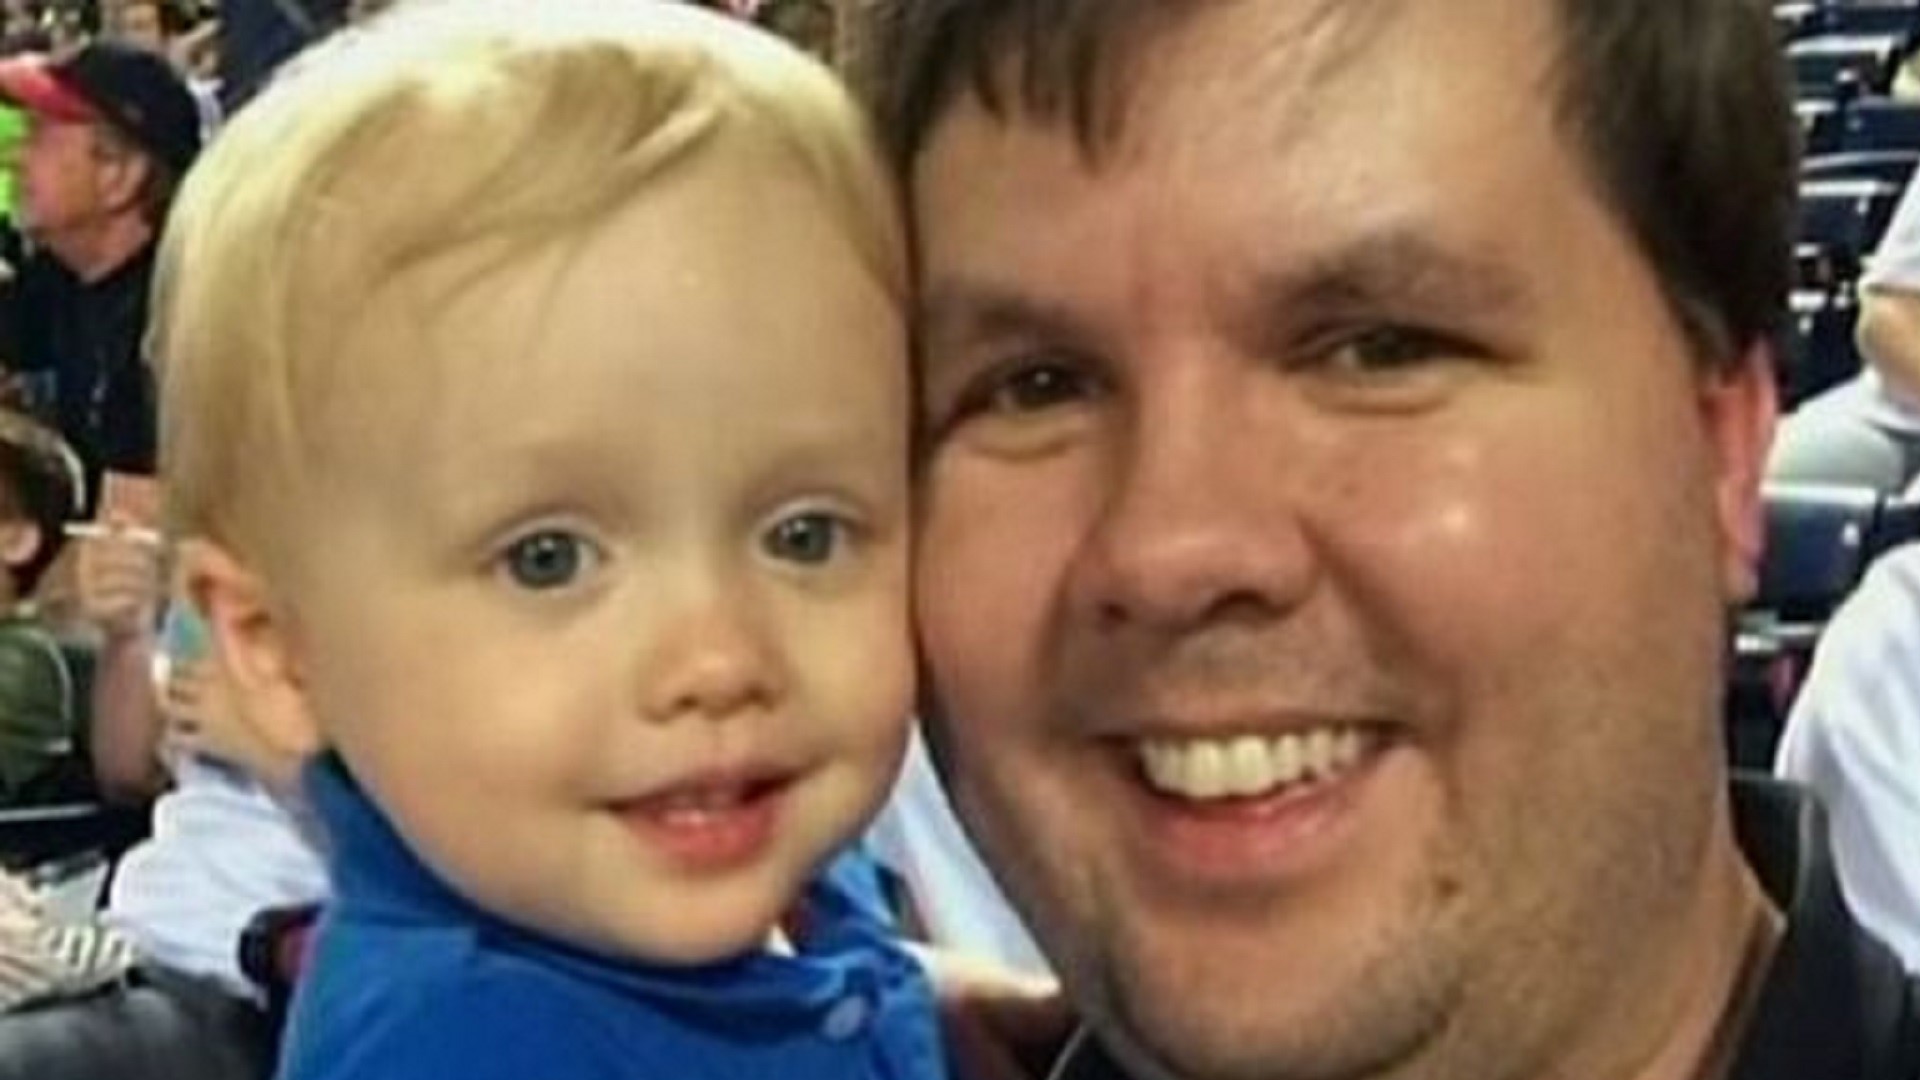 The Cobb County man was convicted of intentionally leaving his toddler in the car to die in 2014.